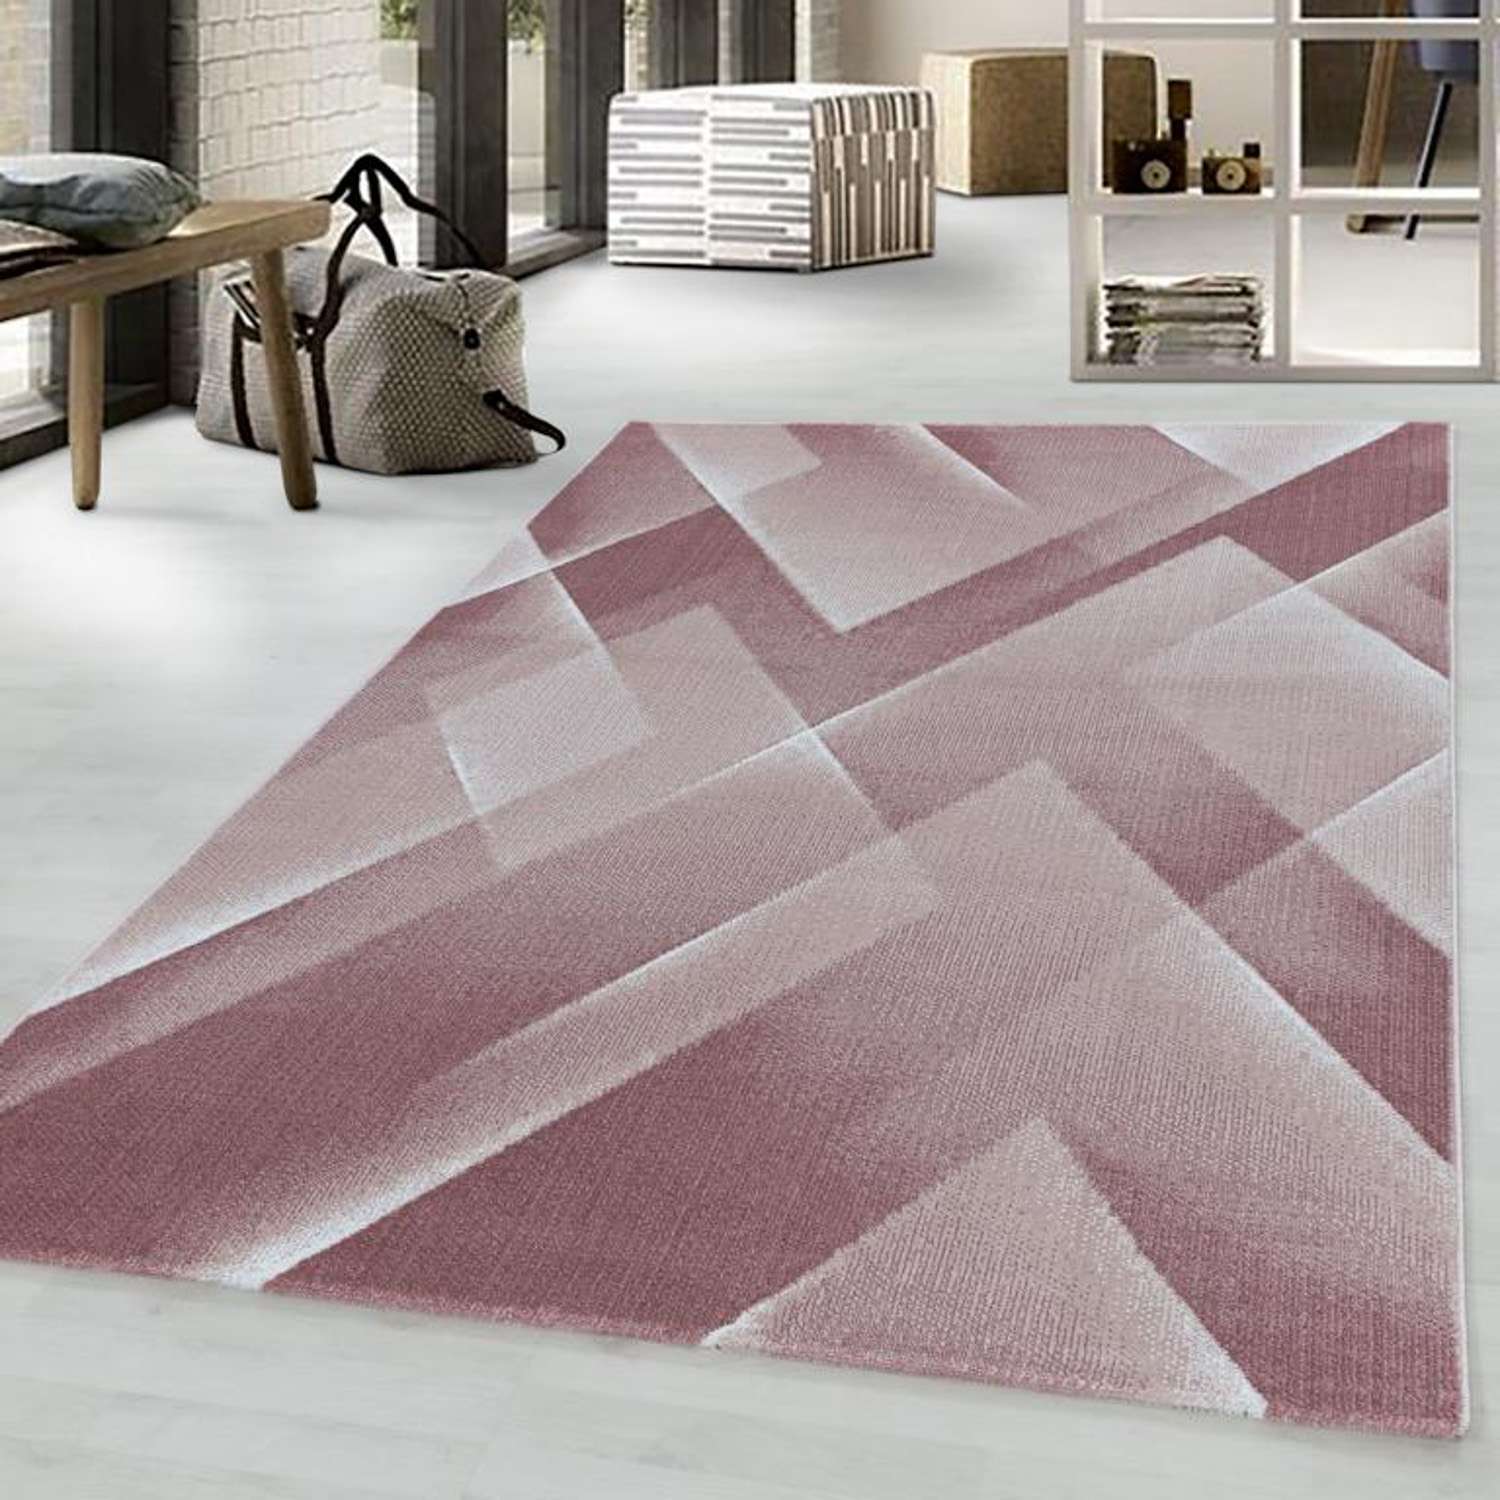 Low-Pile Rug - Camilla - rectangle